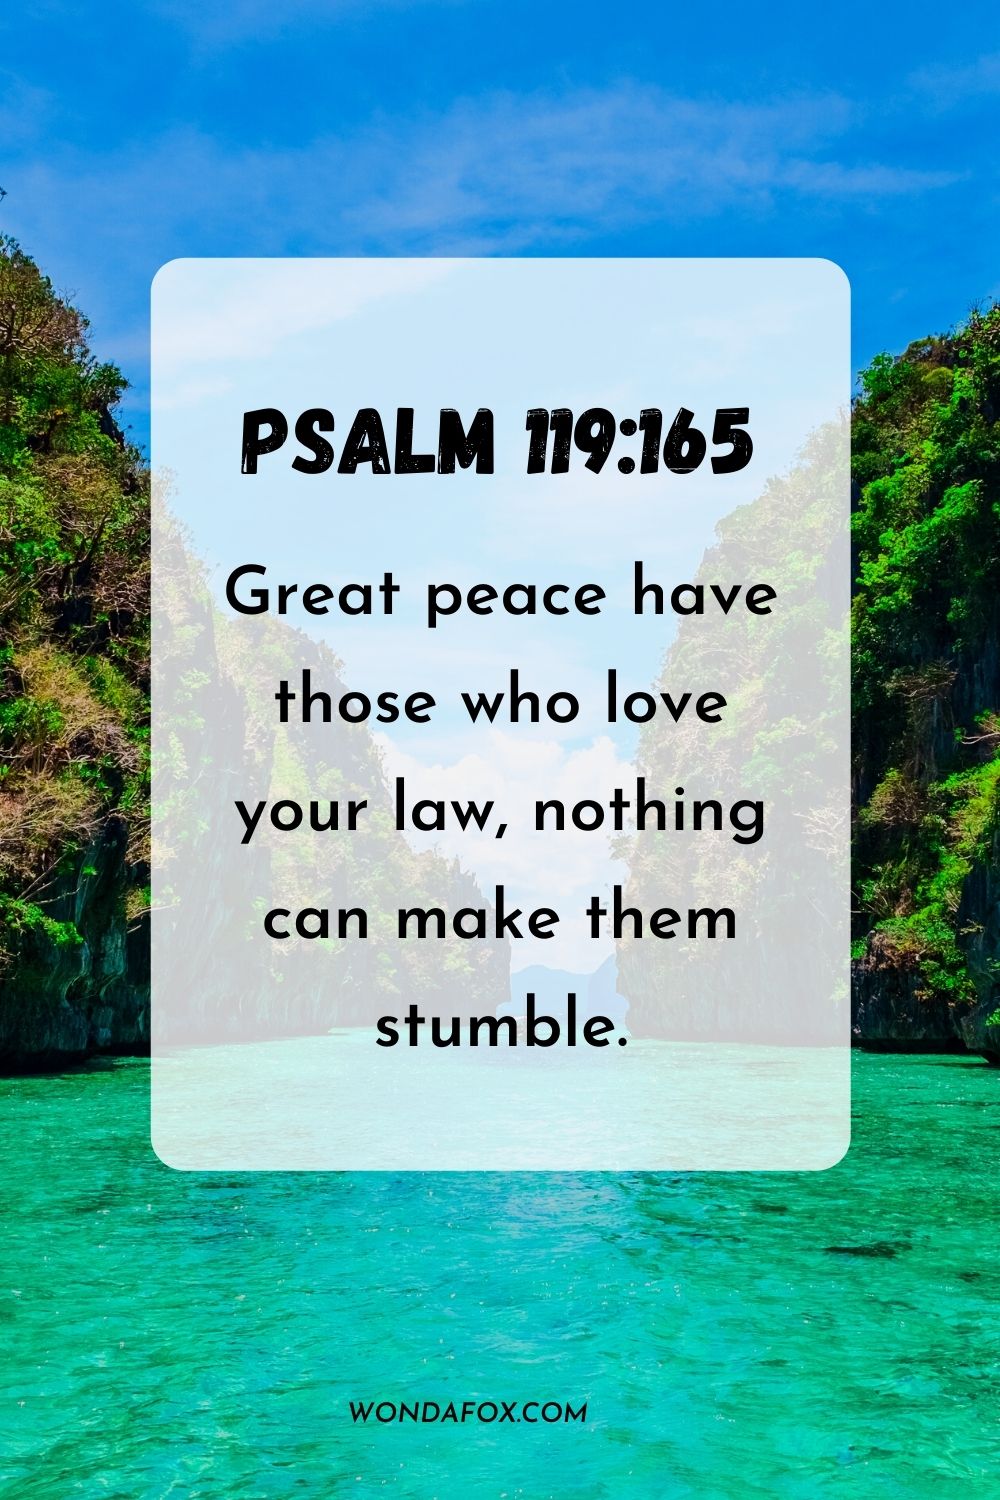 Great peace have those who love your law, nothing can make them stumble. Psalm 119:165